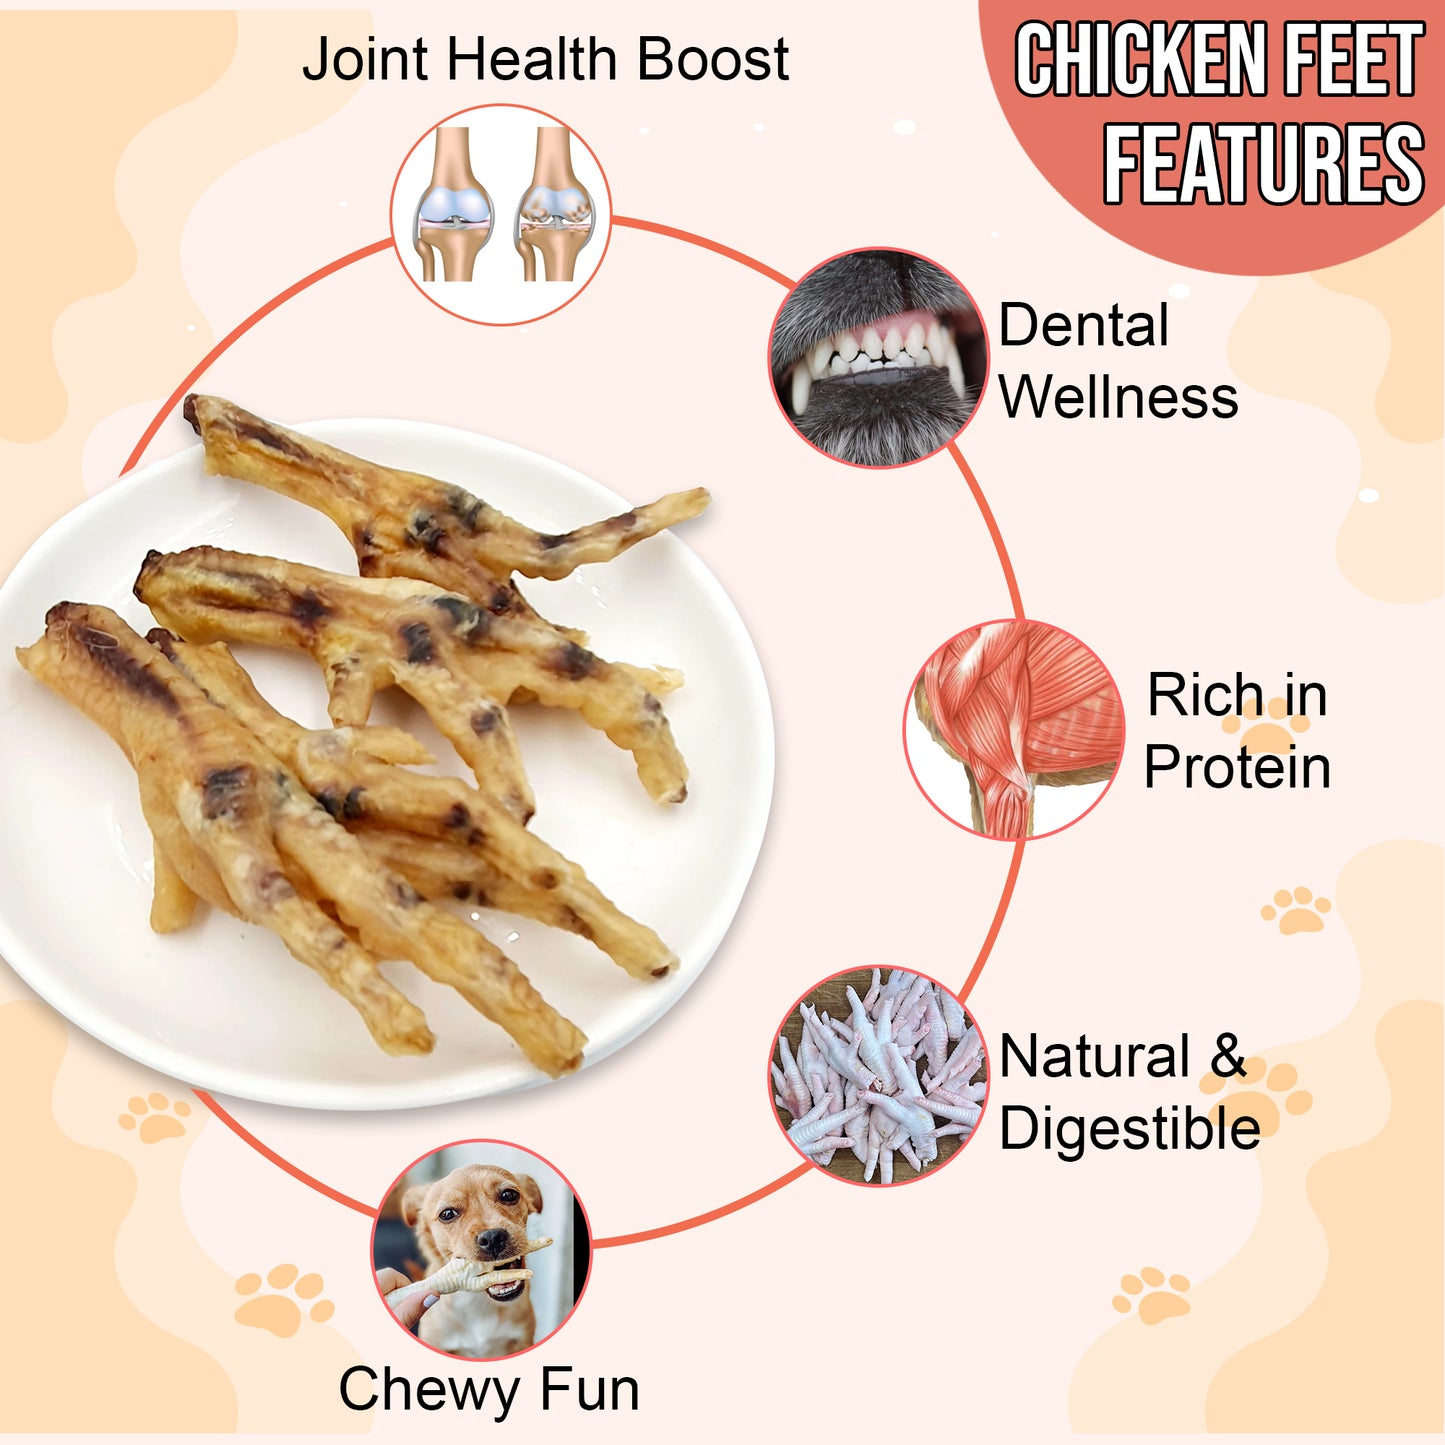 Chicken Feet (Air dried, no nails) Single Natural Ingredient Treat for Dogs. 12 Count